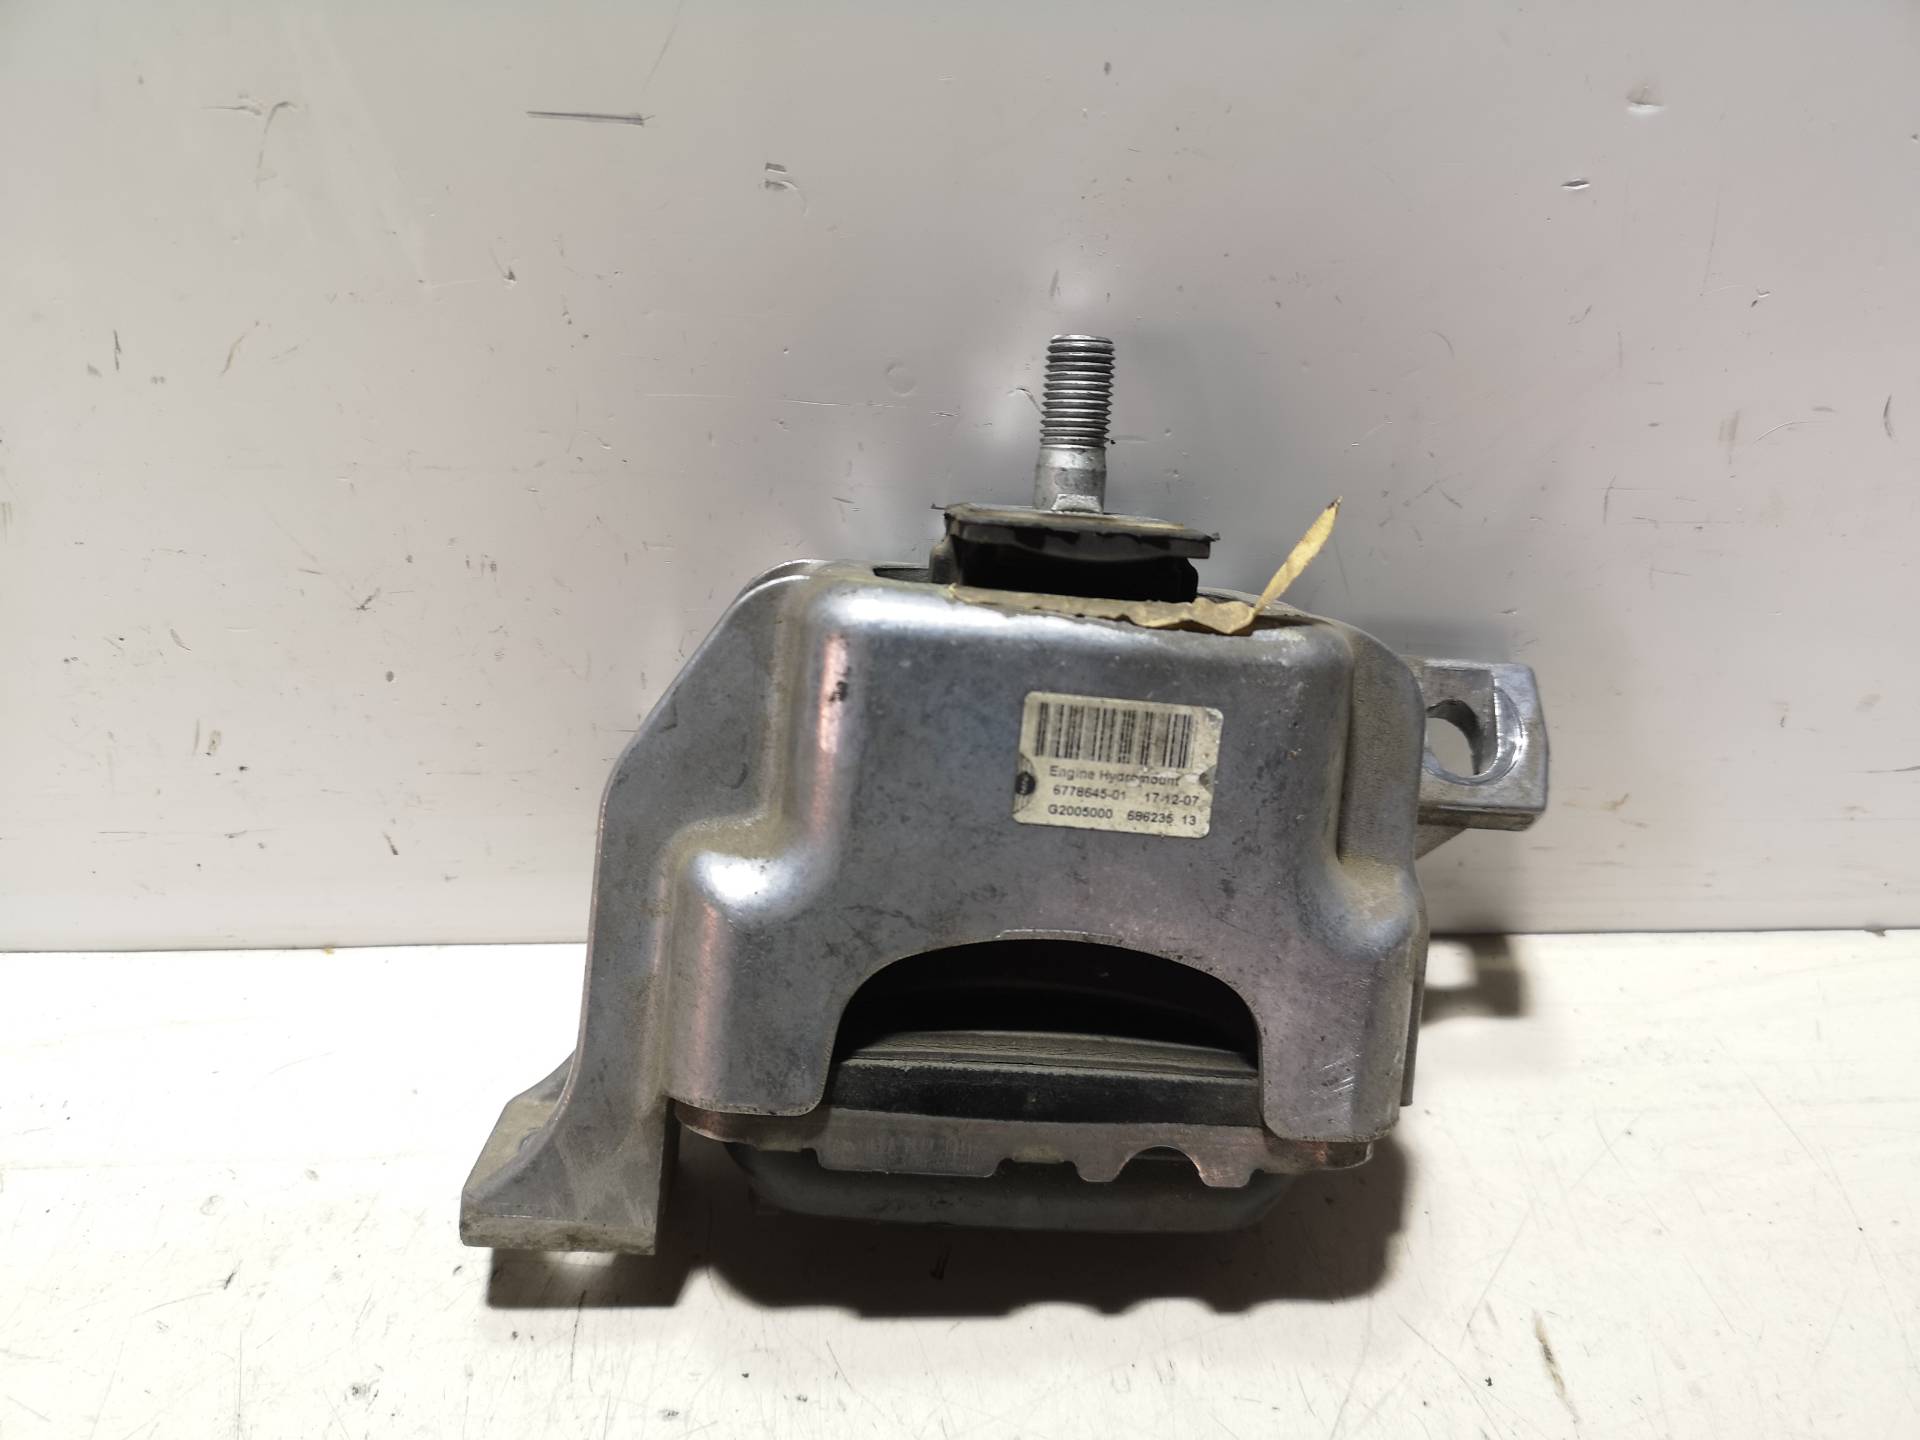 MINI Cooper R56 (2006-2015) Other Engine Compartment Parts 677864501, G2005000, 68623513 25038801